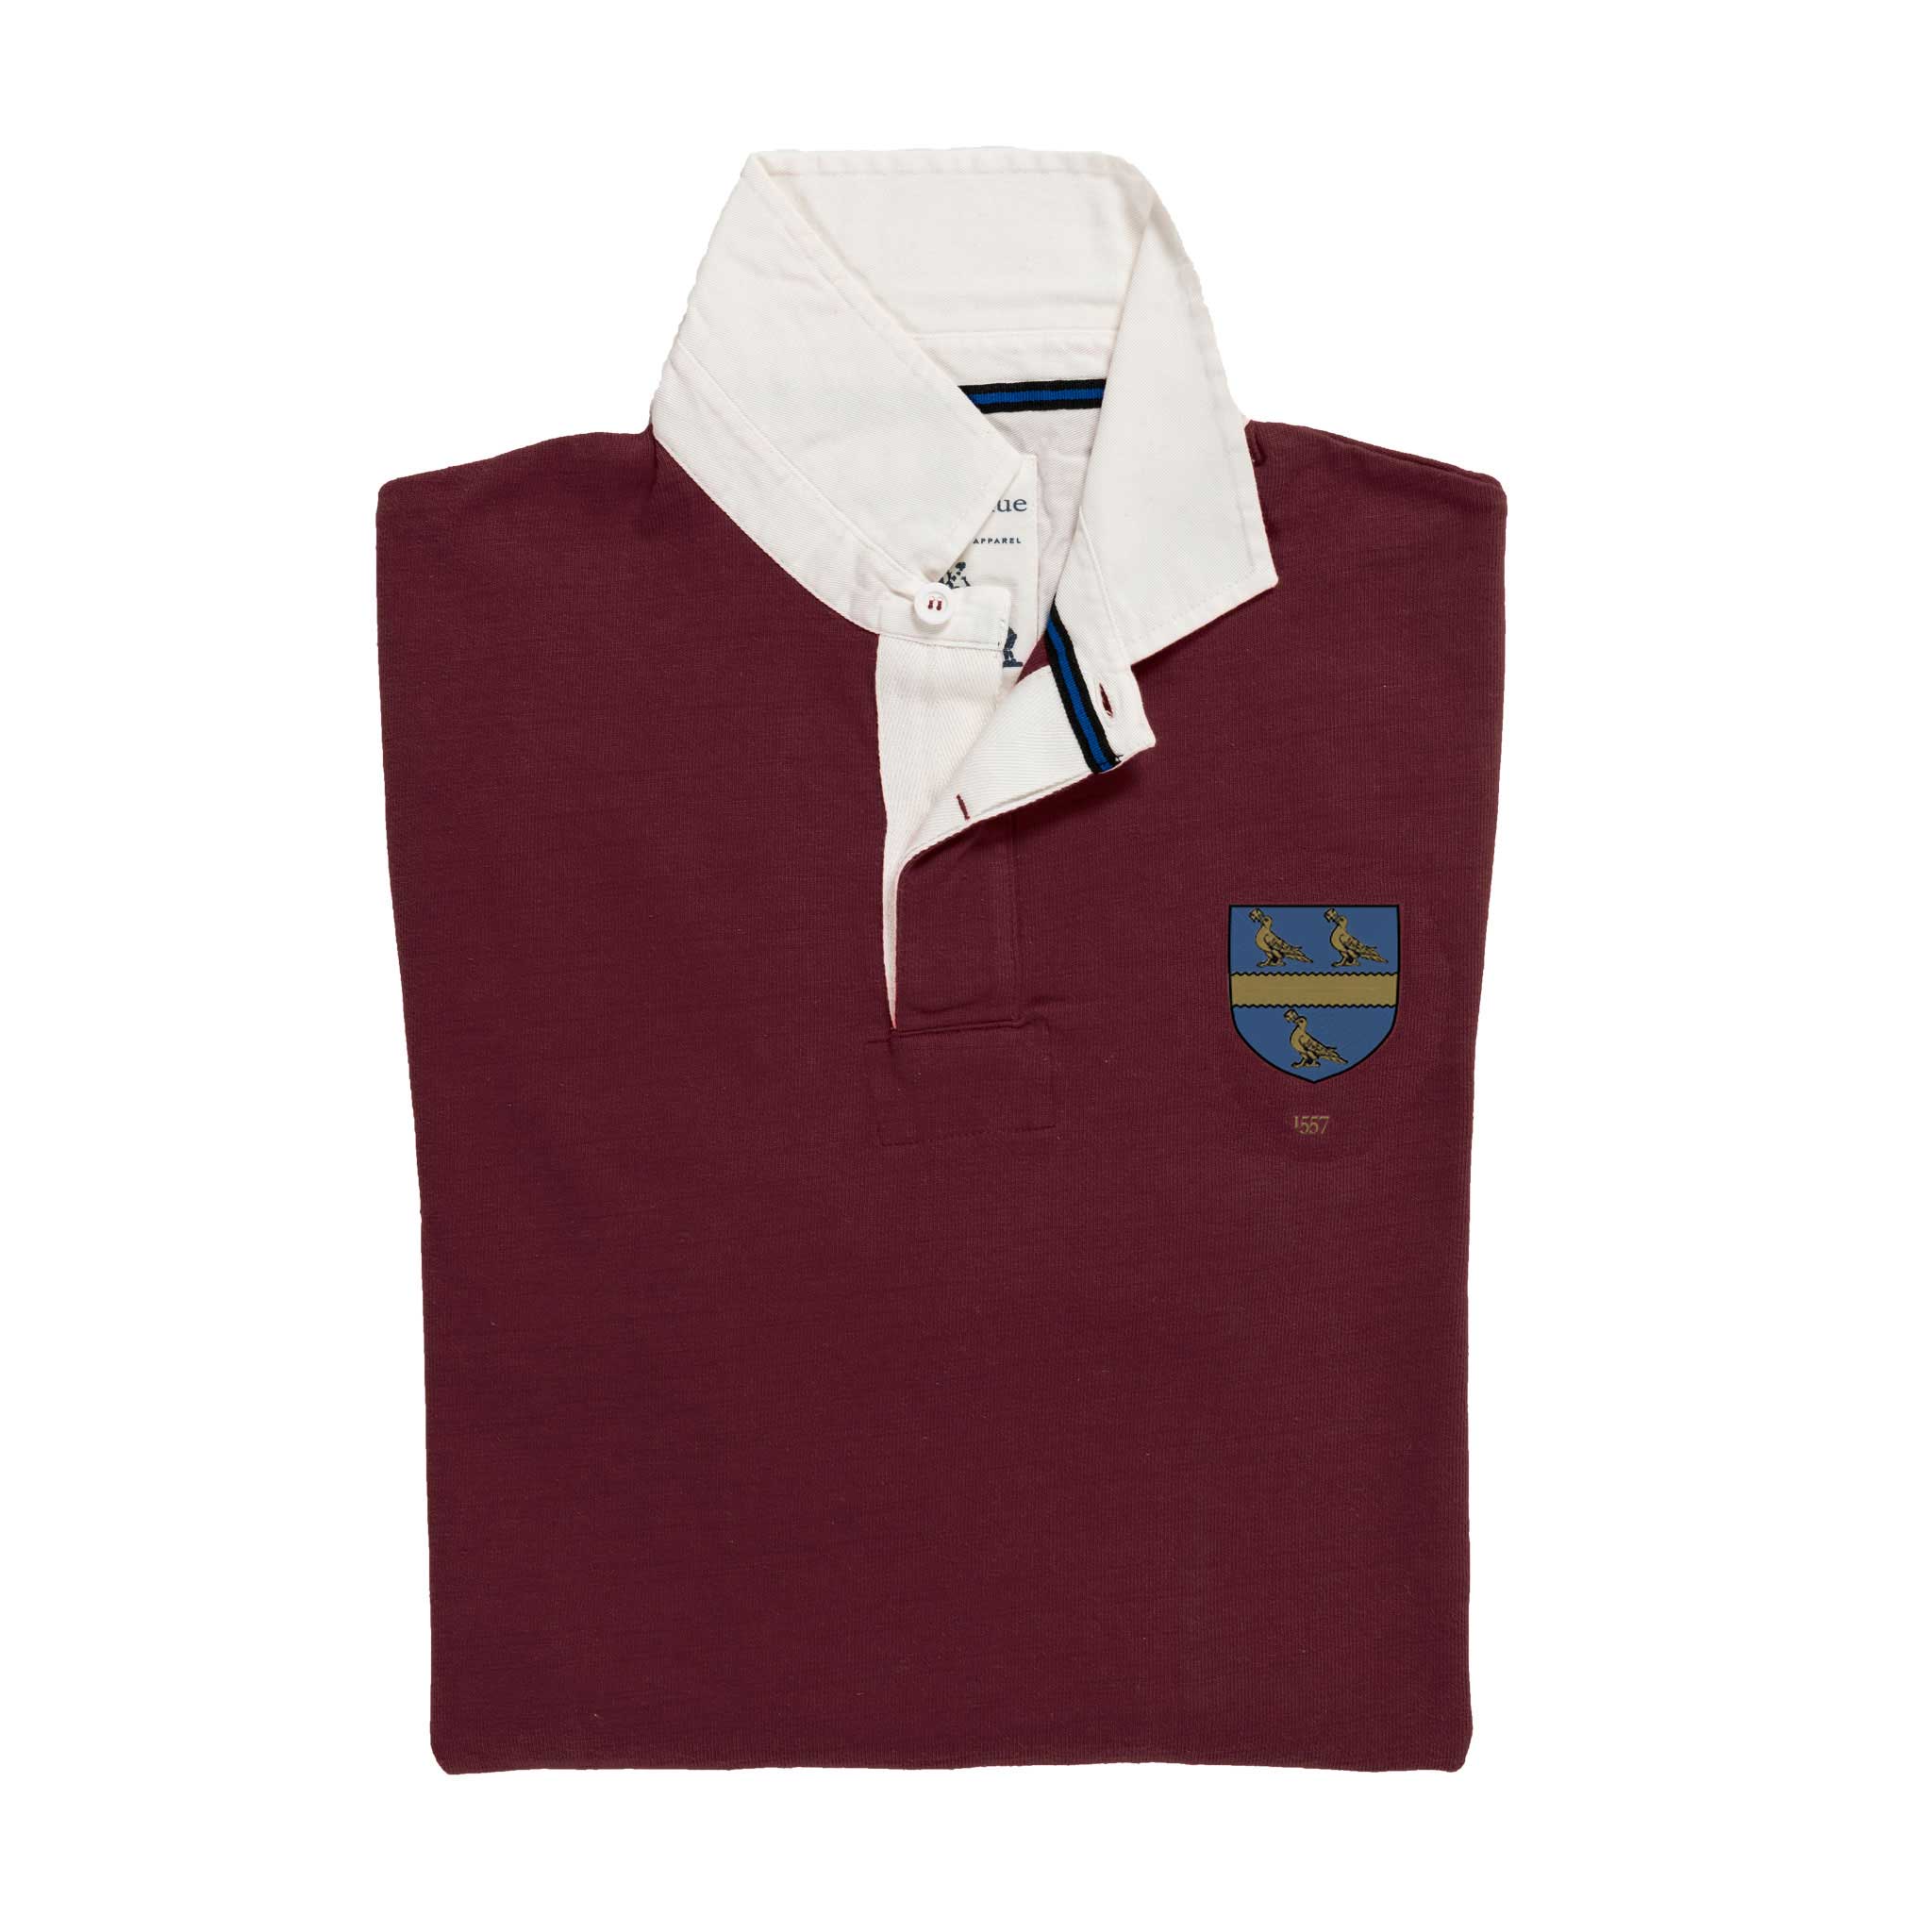 Repton 1557 Rugby Shirt_Folded